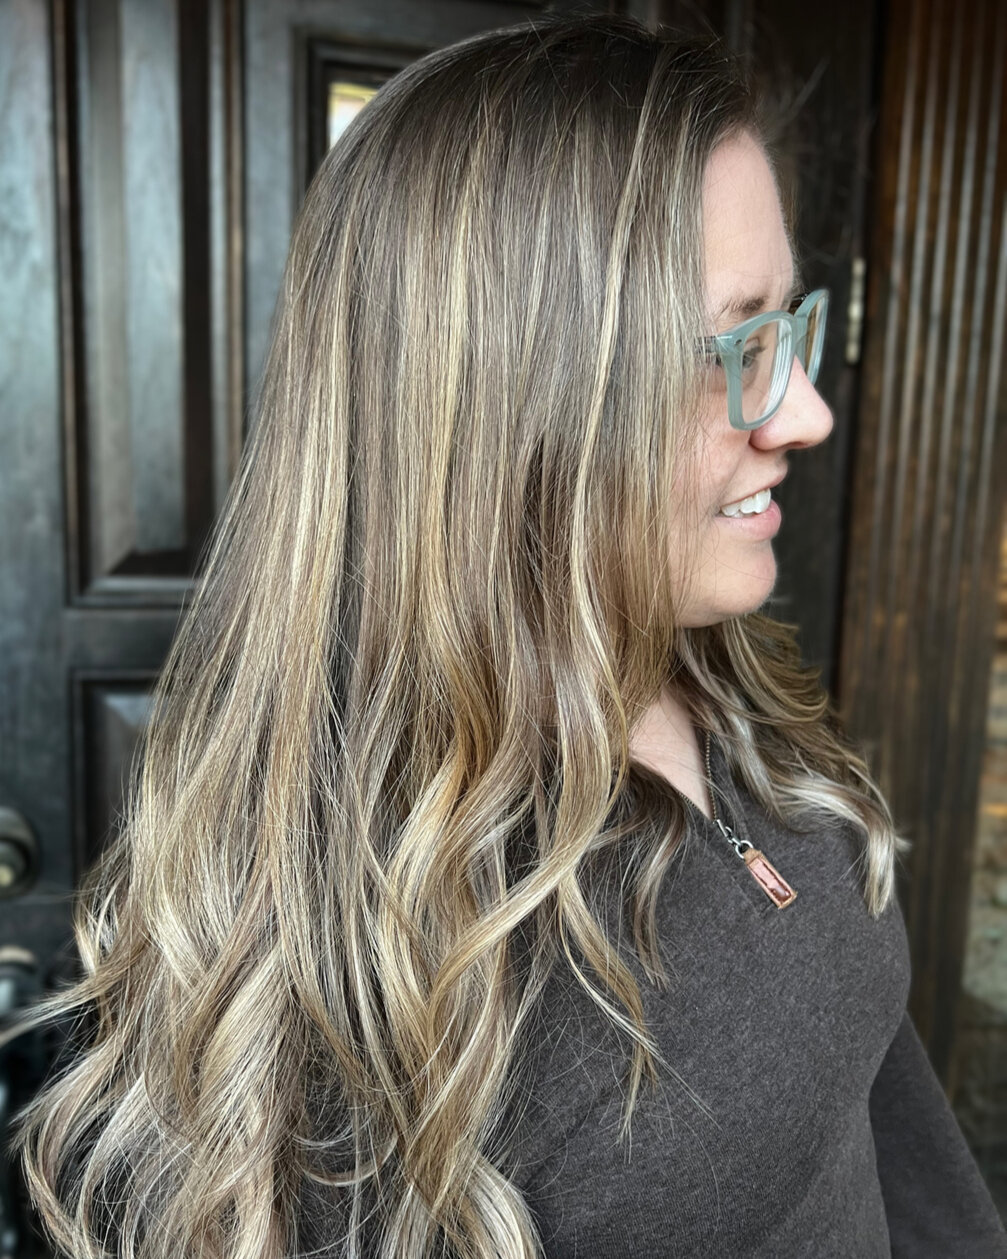 Spring is in the hair! This dimensional bronde by @hairbyjessicanord is the perfect low-maintenance look for the warm weather 🌼 Have you ever tried a lived-in hair color before?​​​​​​​​​

#knoxville #knoxvilletn #knoxvilletennessee #knoxvillehairsty